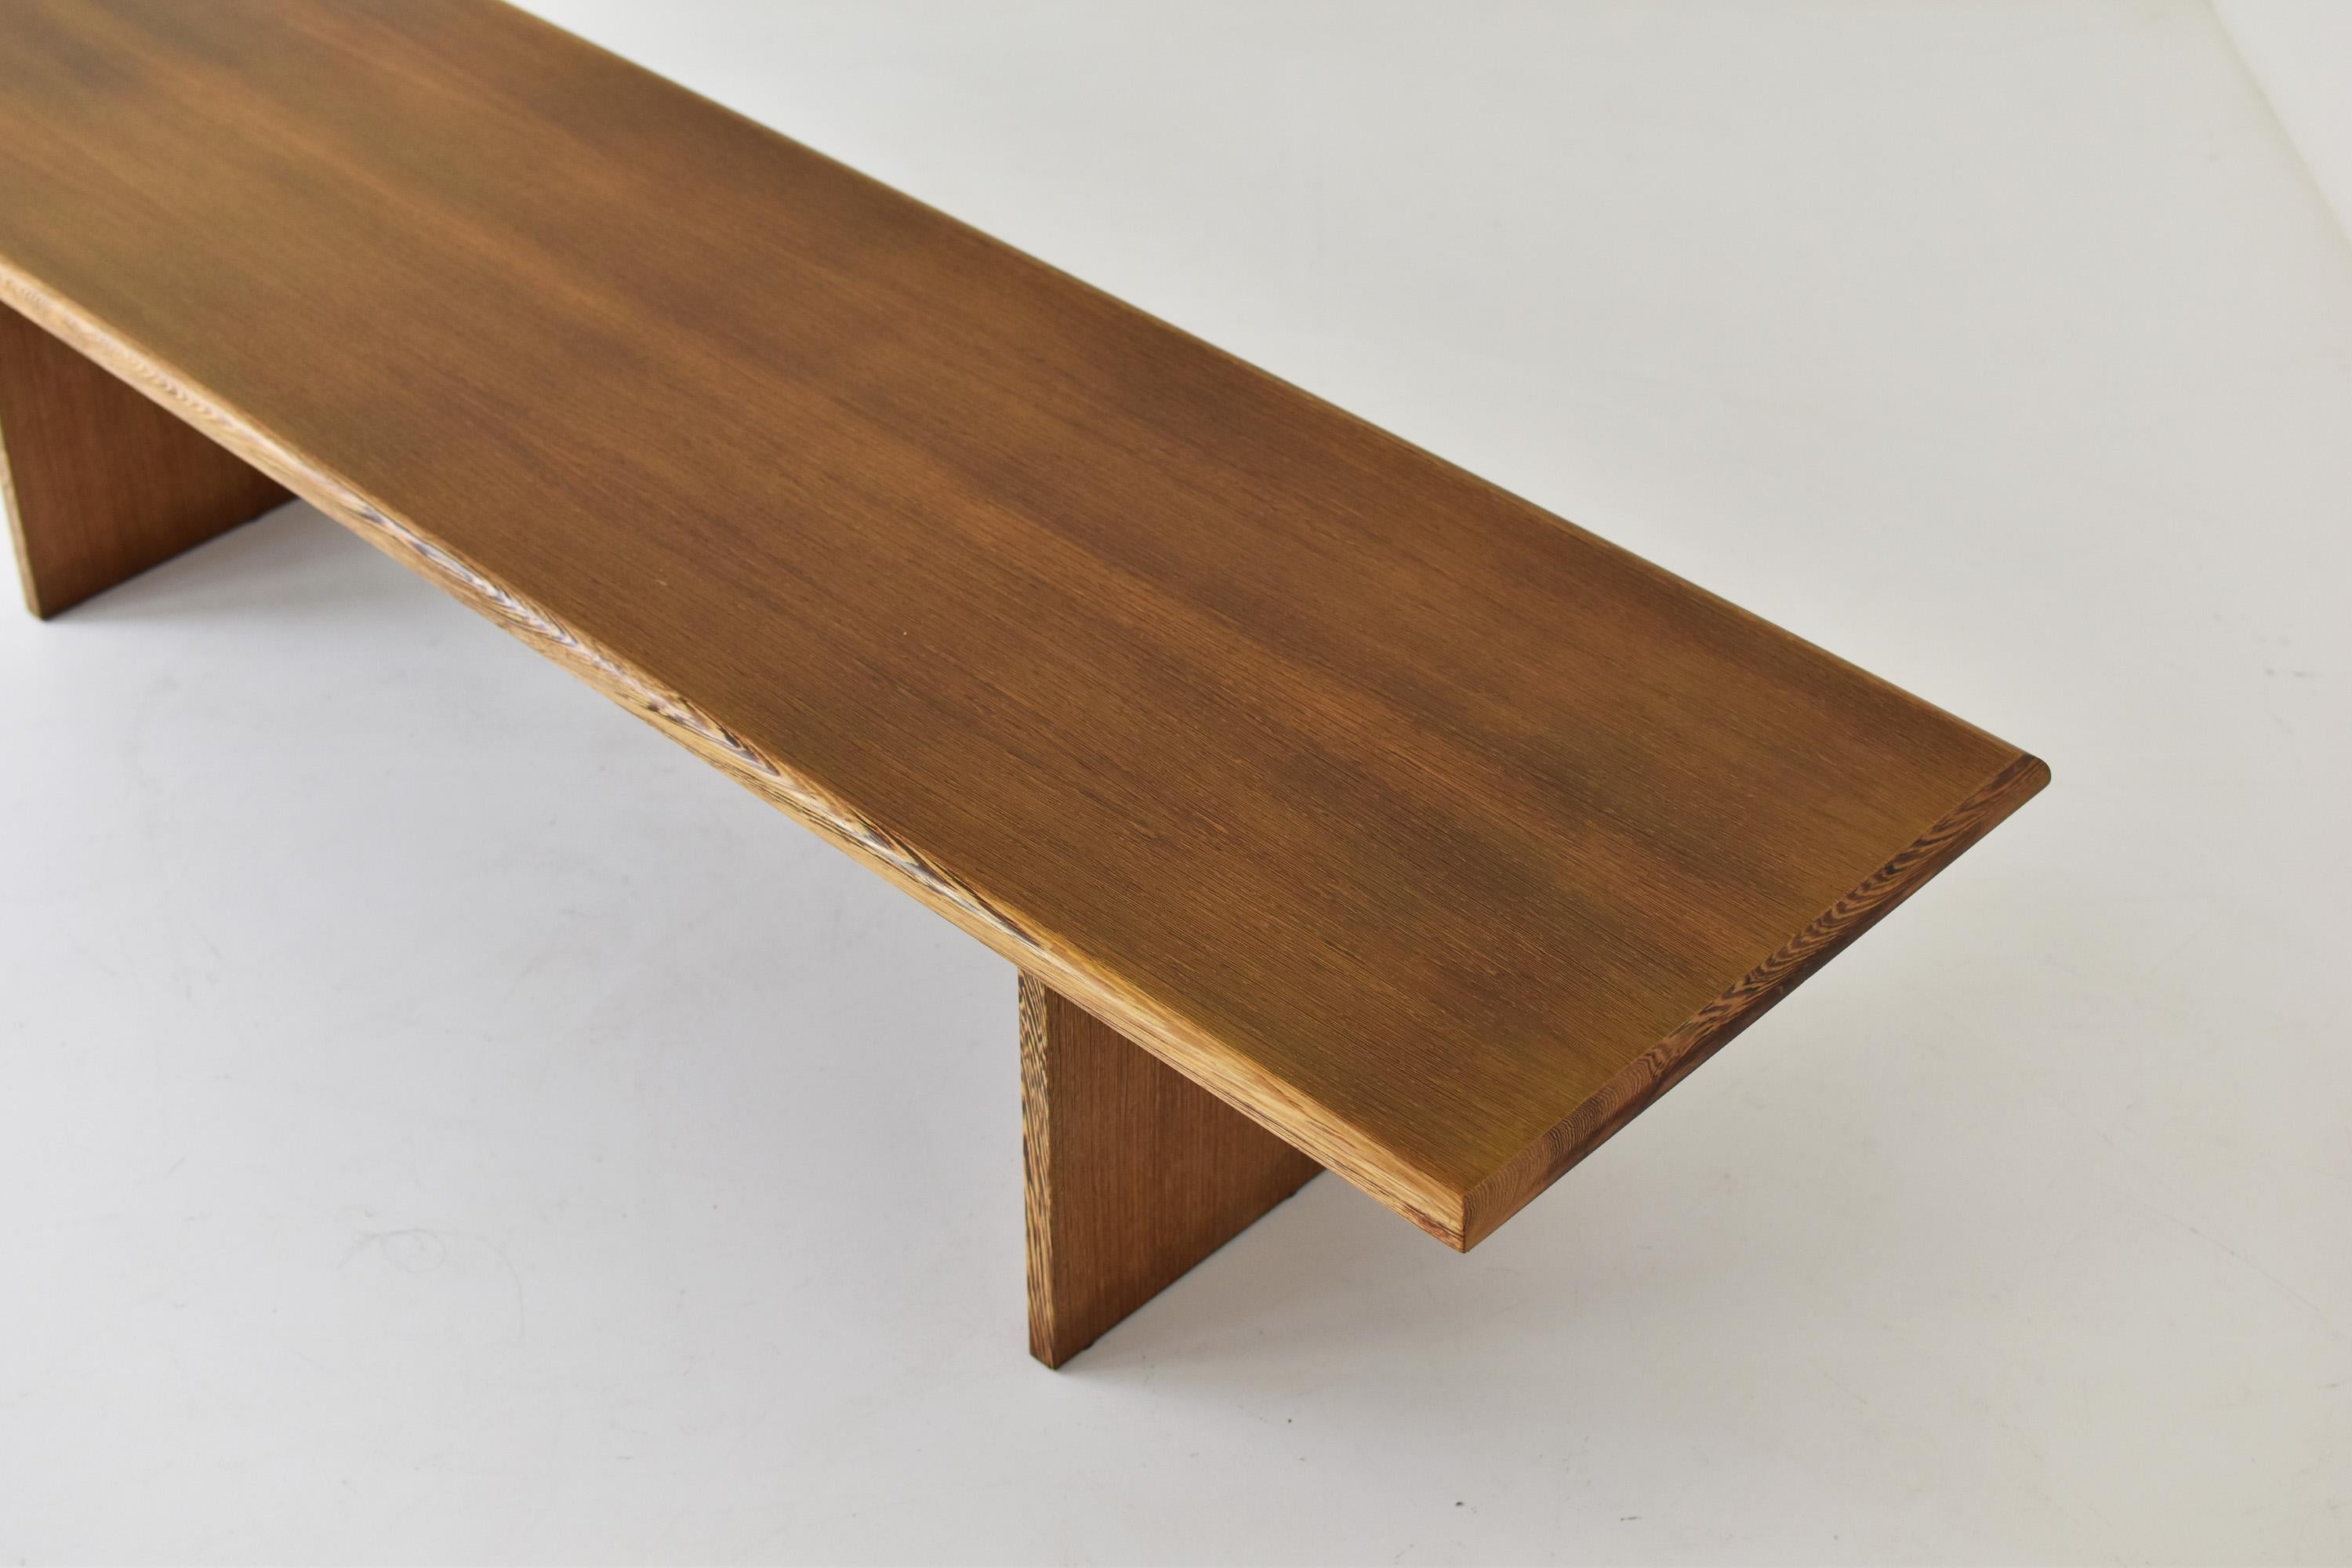 Mid-20th Century Low Coffee Table from Belgium, Designed and Manufactured in the 1960’s